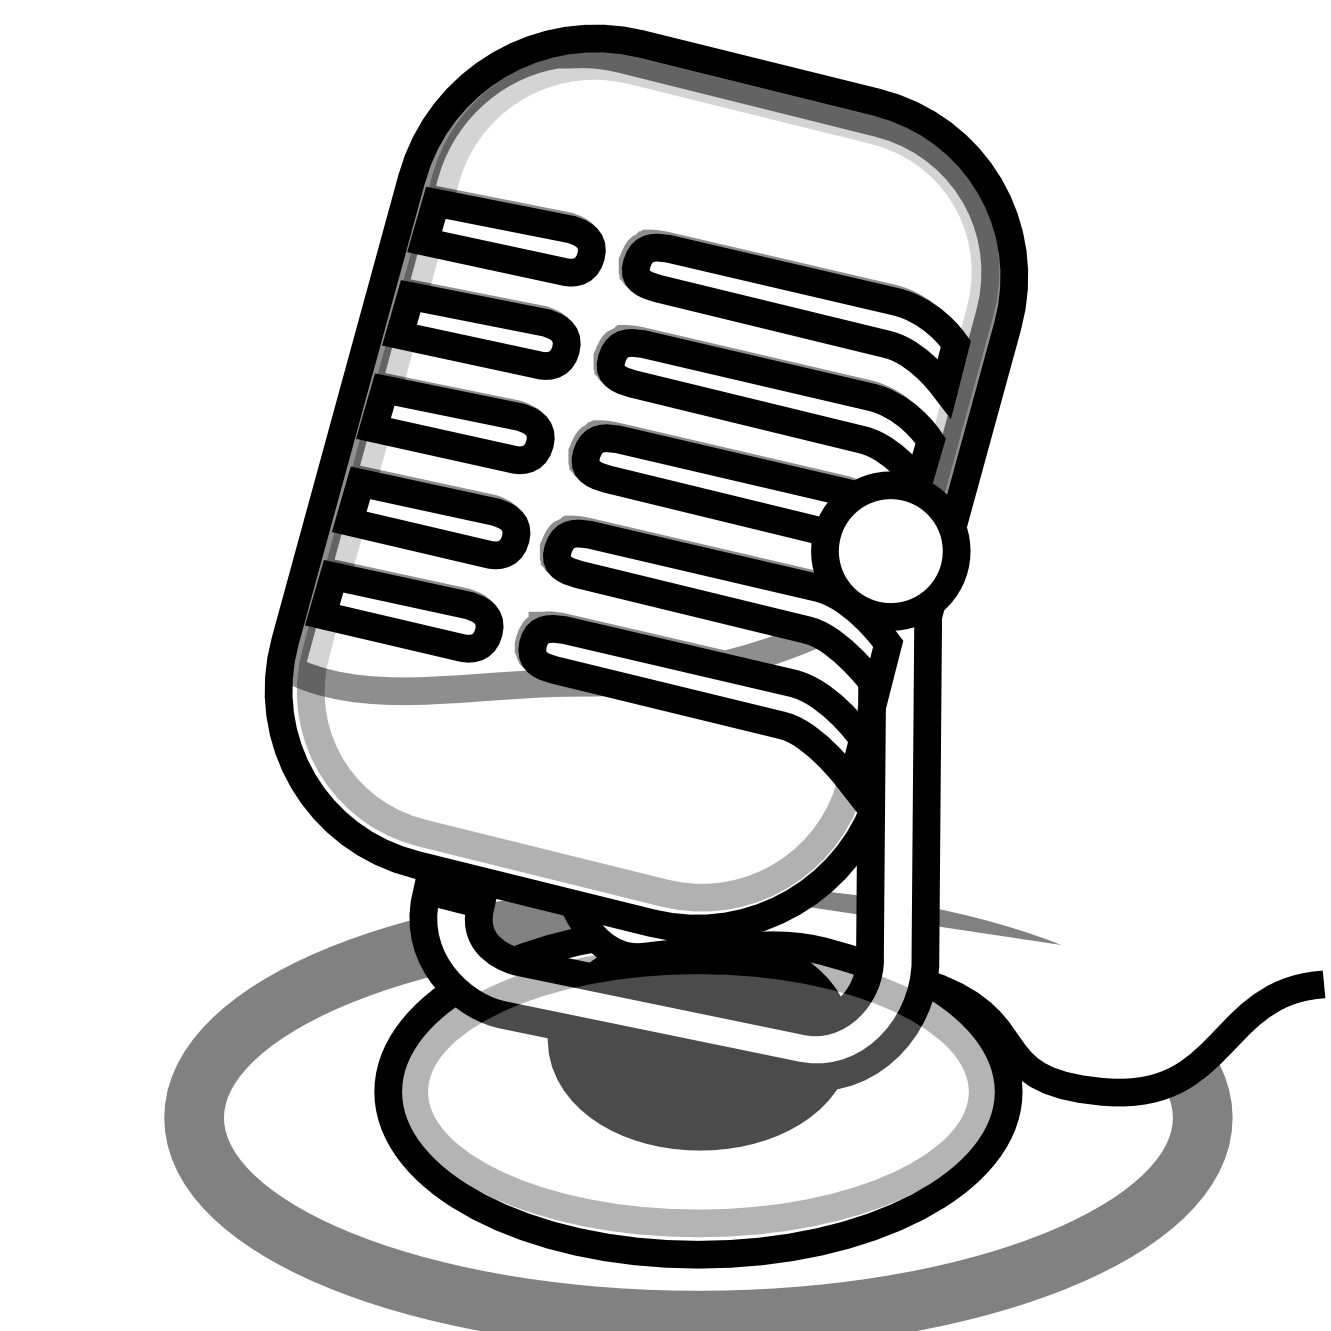 Radio Clipart Black And White Microphone Clipart Microphone Clip Art